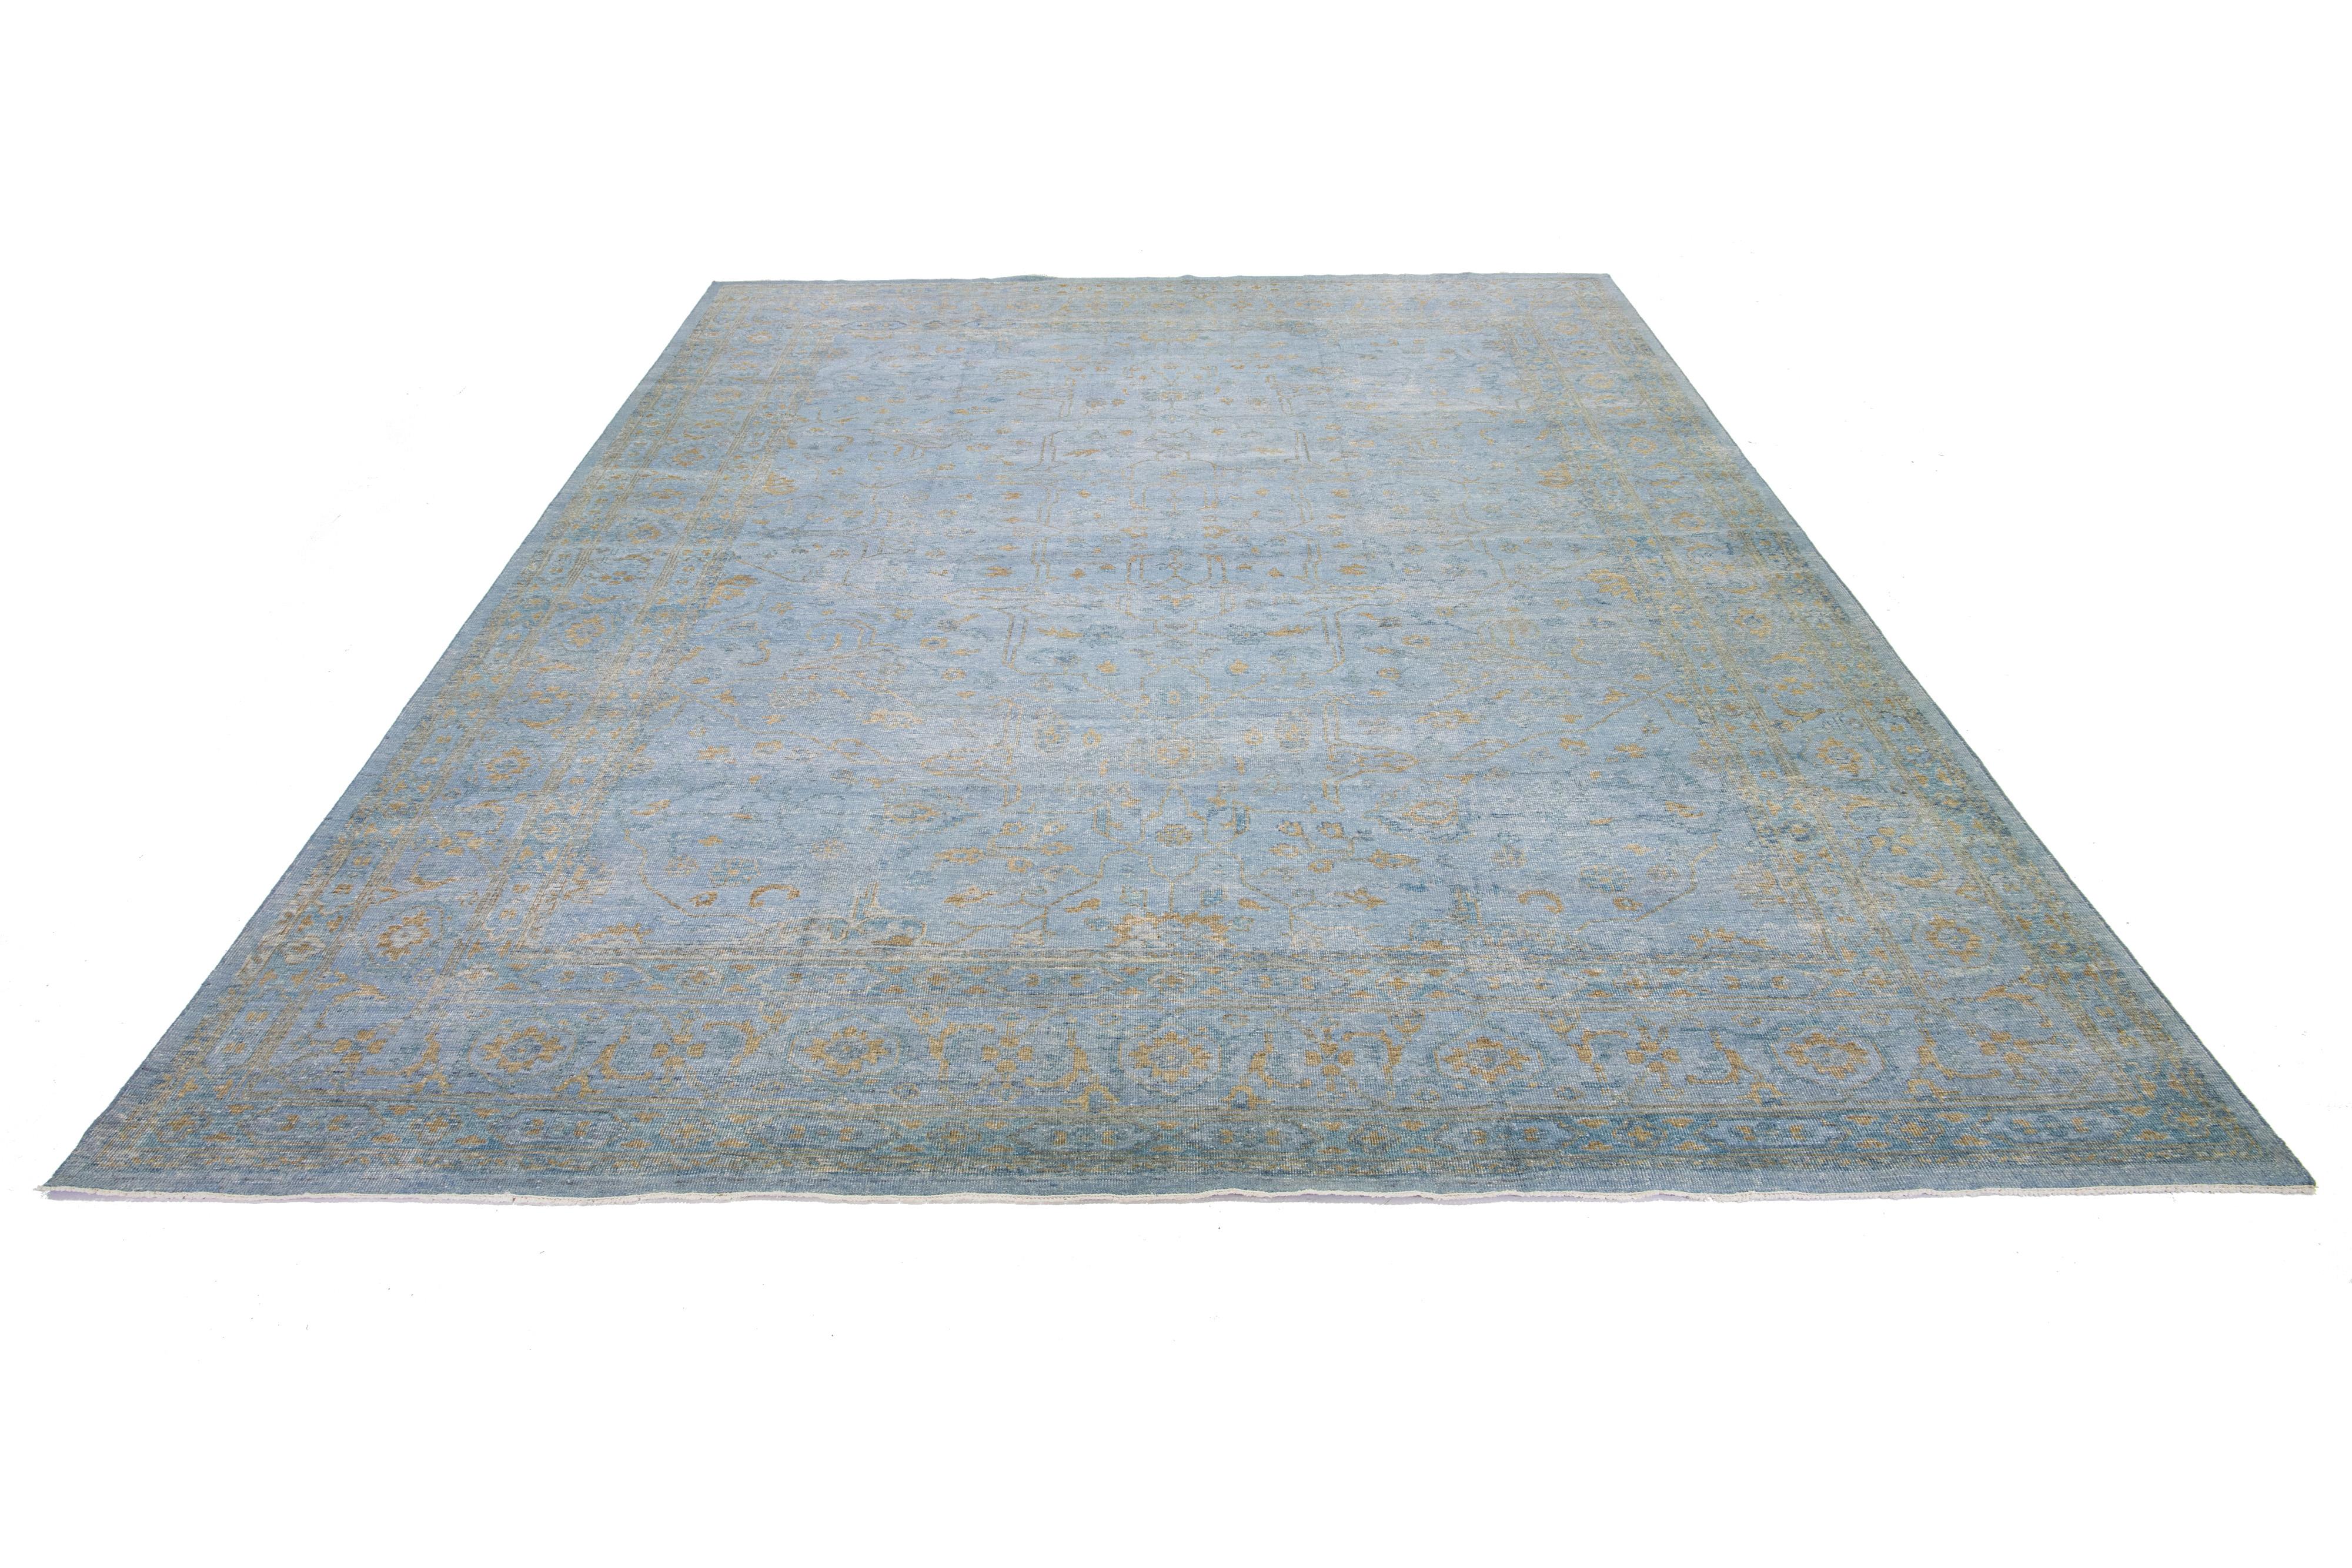 This Oushak rug is hand-knotted with a blue field. This mid-century modern-style rug has an allover golden floral design. 

This rug measures 11'9